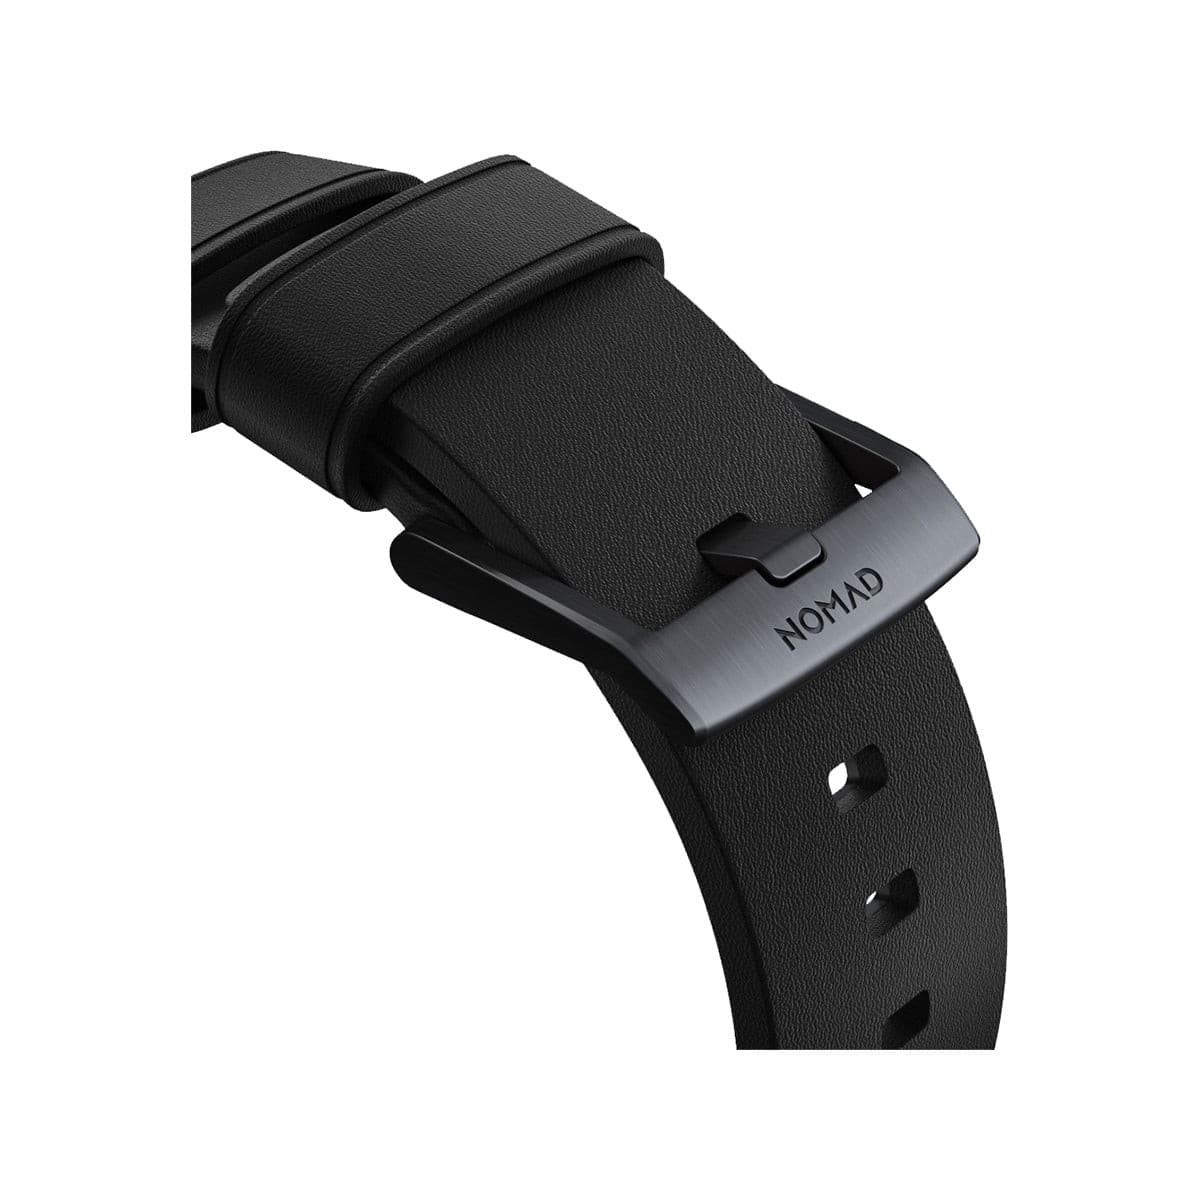 Nomad Active Band Pro 45mm - Black Hard with Black Leather Strap.